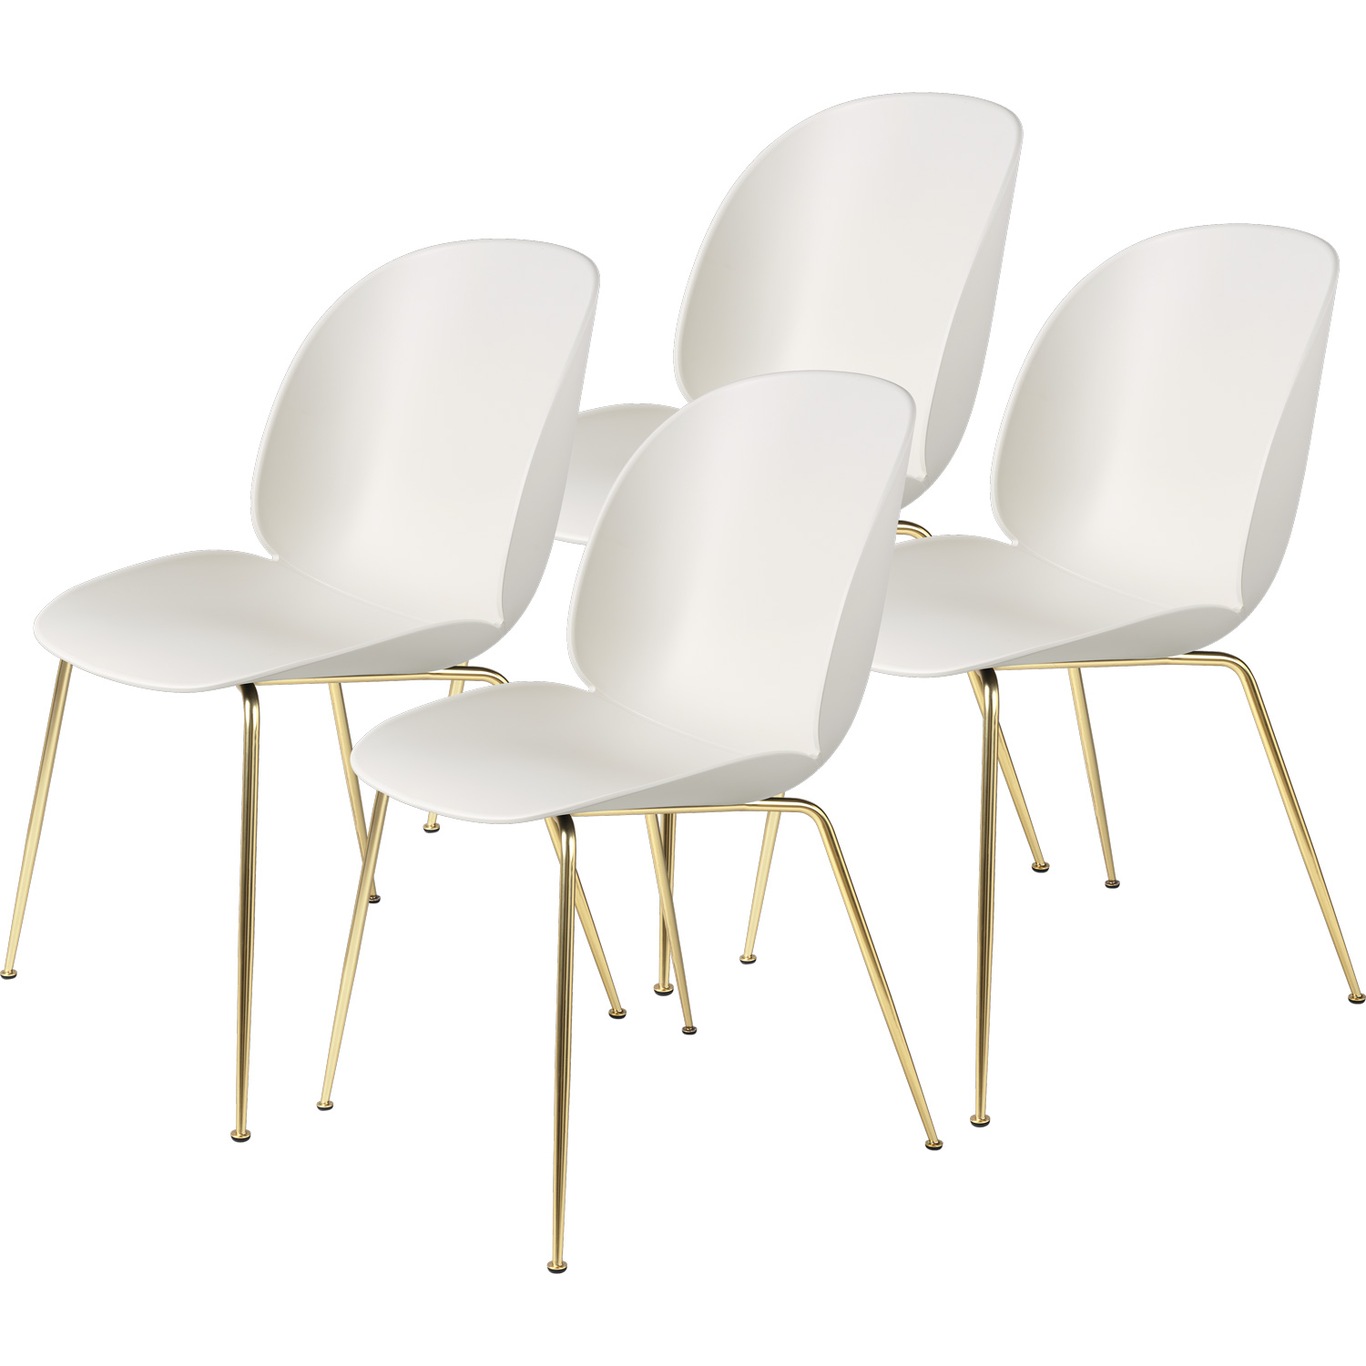 Beetle Chair Un-upholstered 4-pack Conic Base Brass, Alabaster White